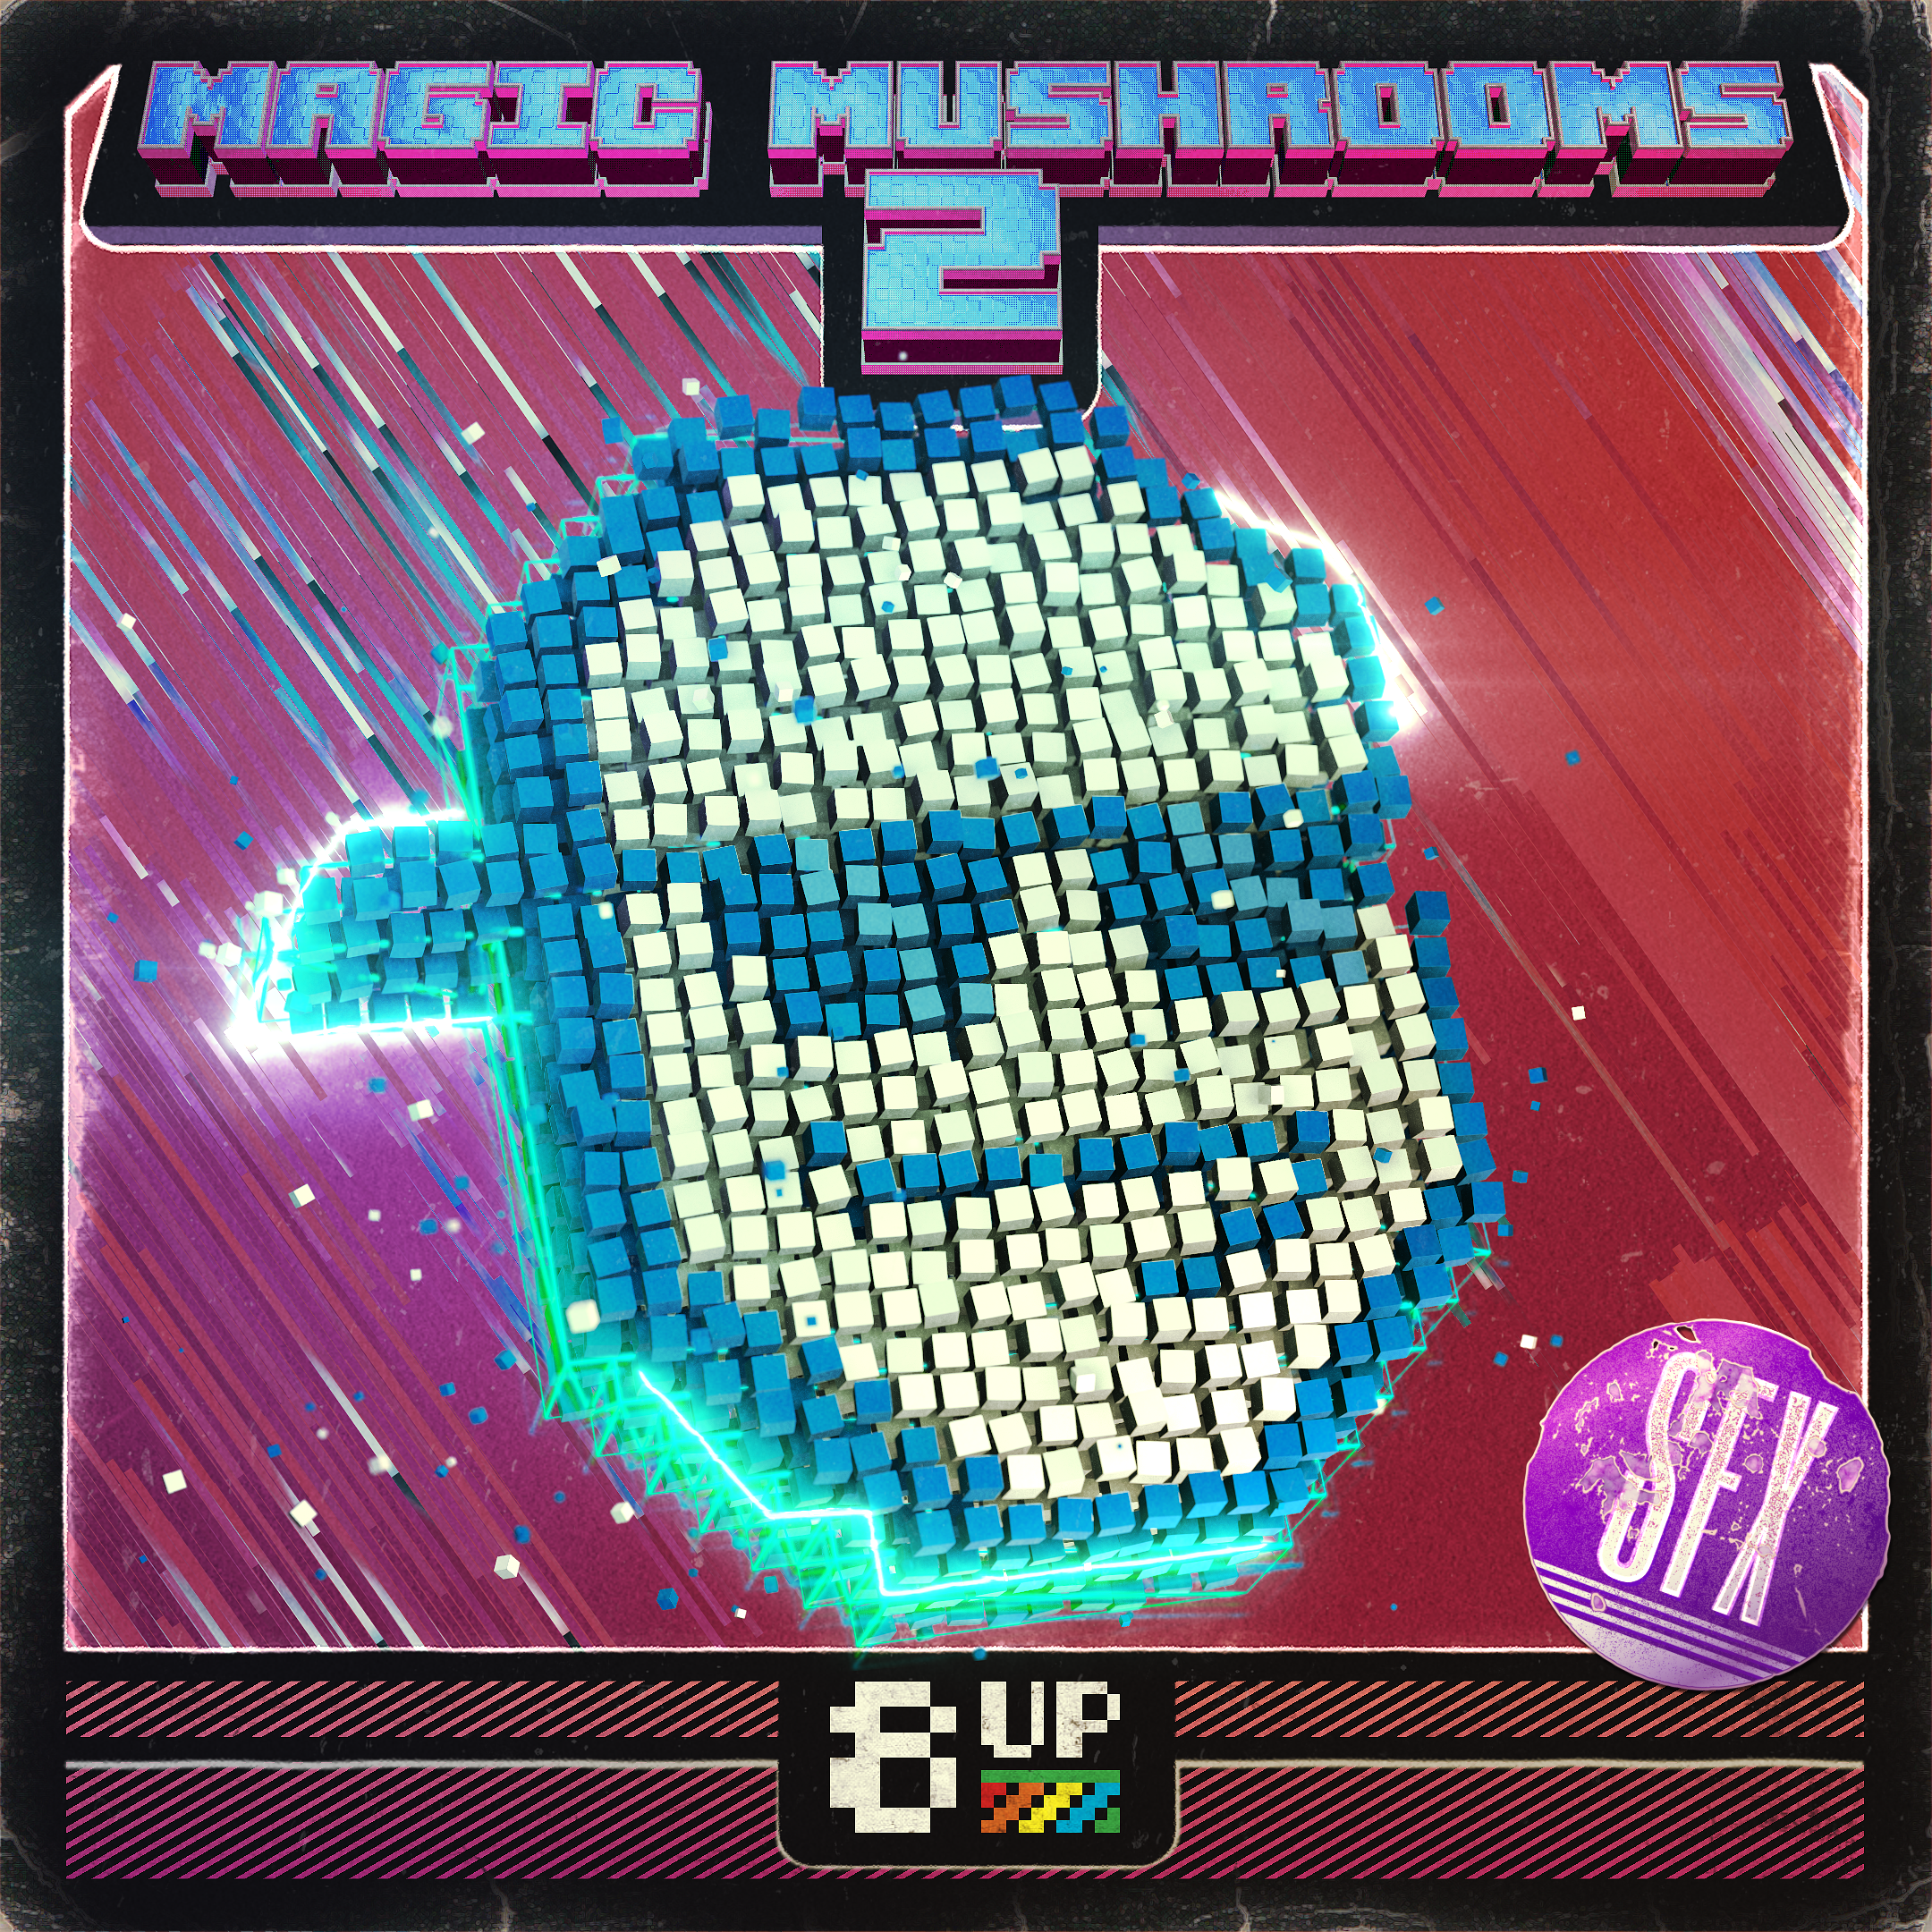 Magic Mushrooms 2 Sound Effects Packshot by 8UP